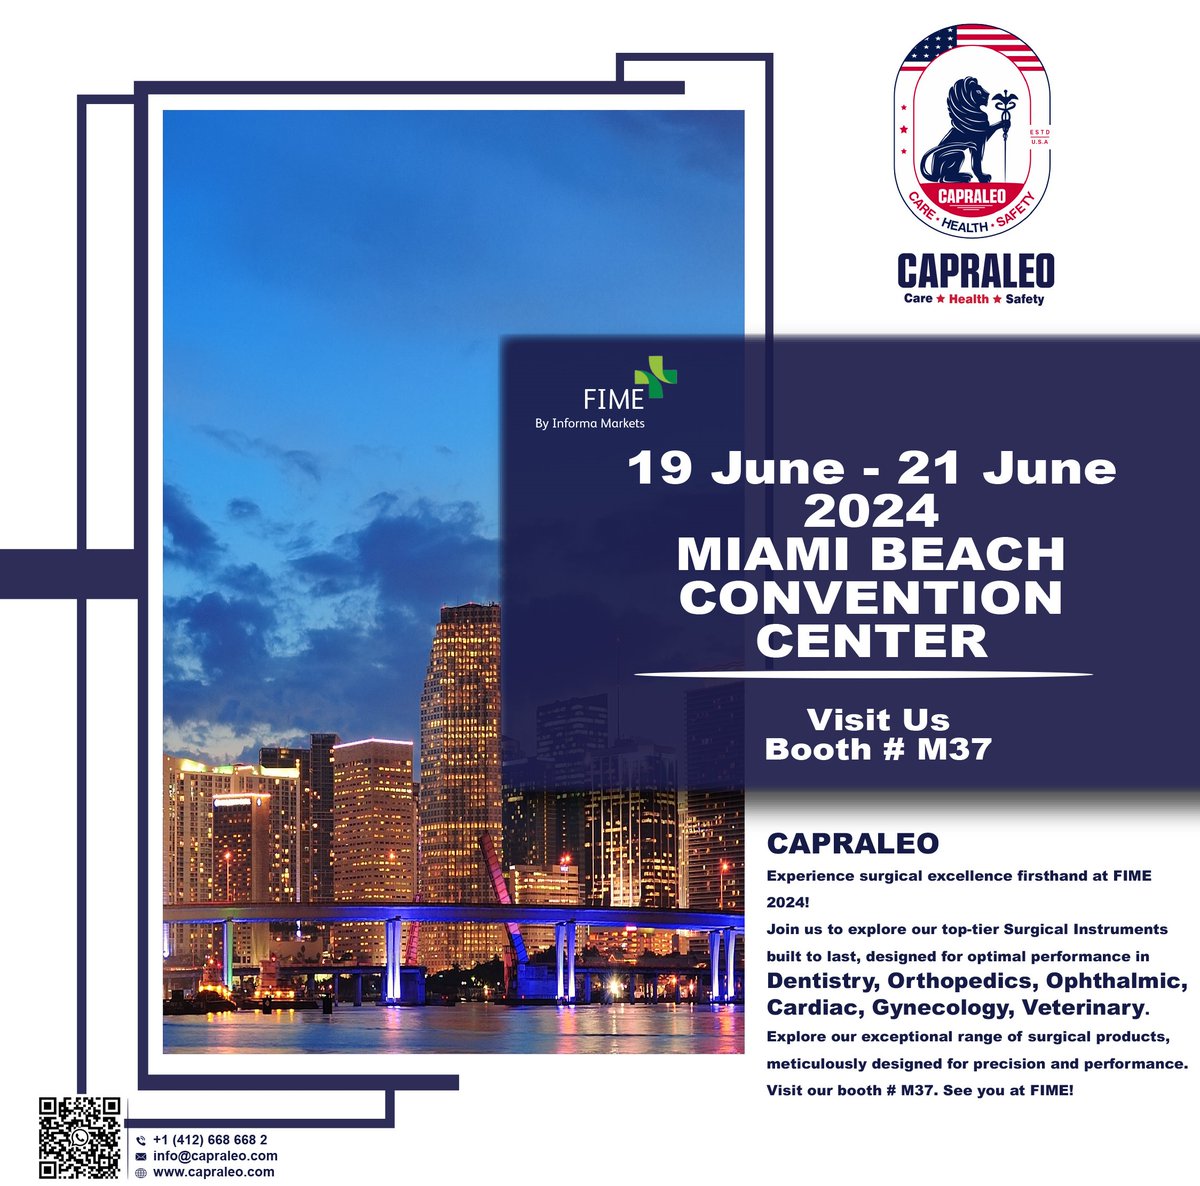 CAPRALEO exhibiting at FIME 2024
Visit us @ Booth # M37
19 June to 21 June 2024
Miami Beach Convention Centre
#FIME #2024 #capraleostore #capraleo #capraleoinstruments #carehealthandsafety #surgicalinstruments #dentalinstruments